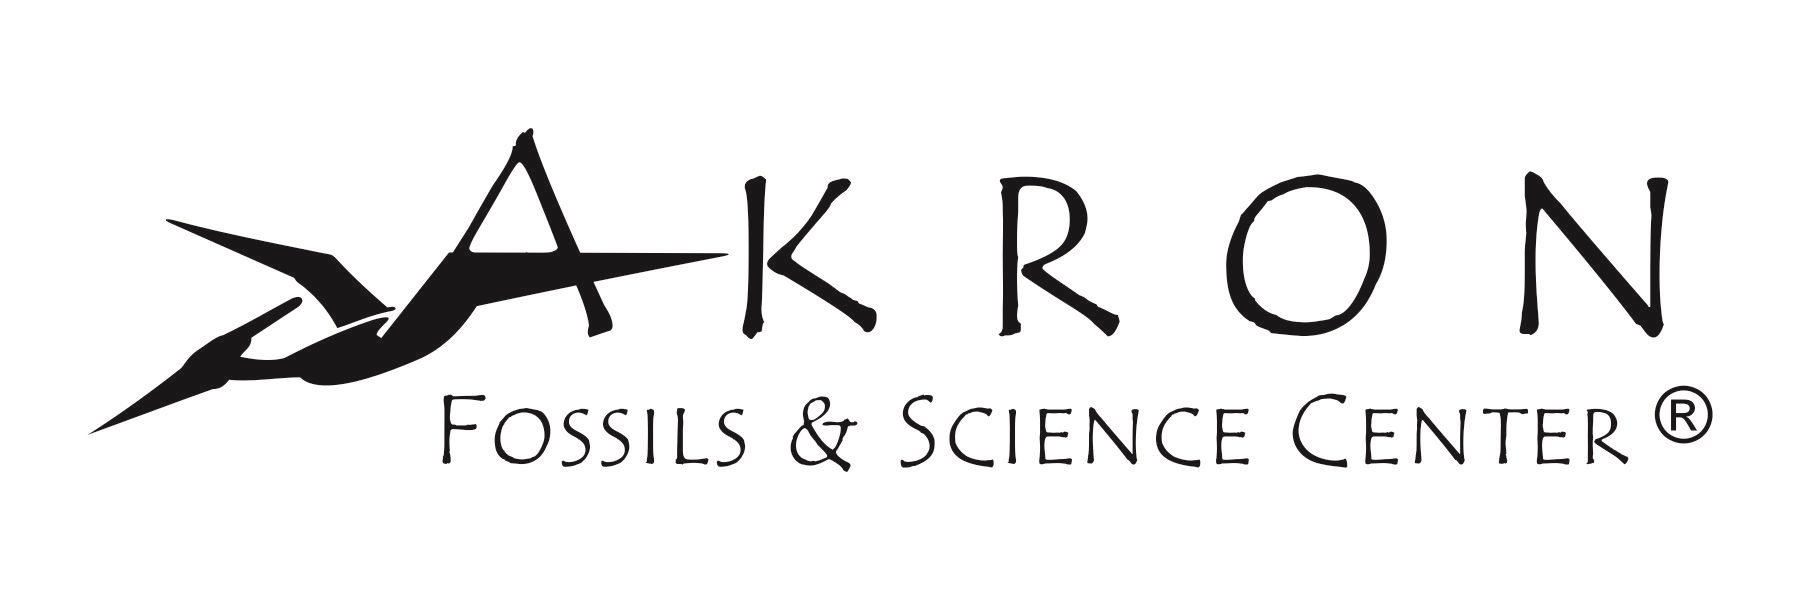 Akron Fossils and Science Center logo